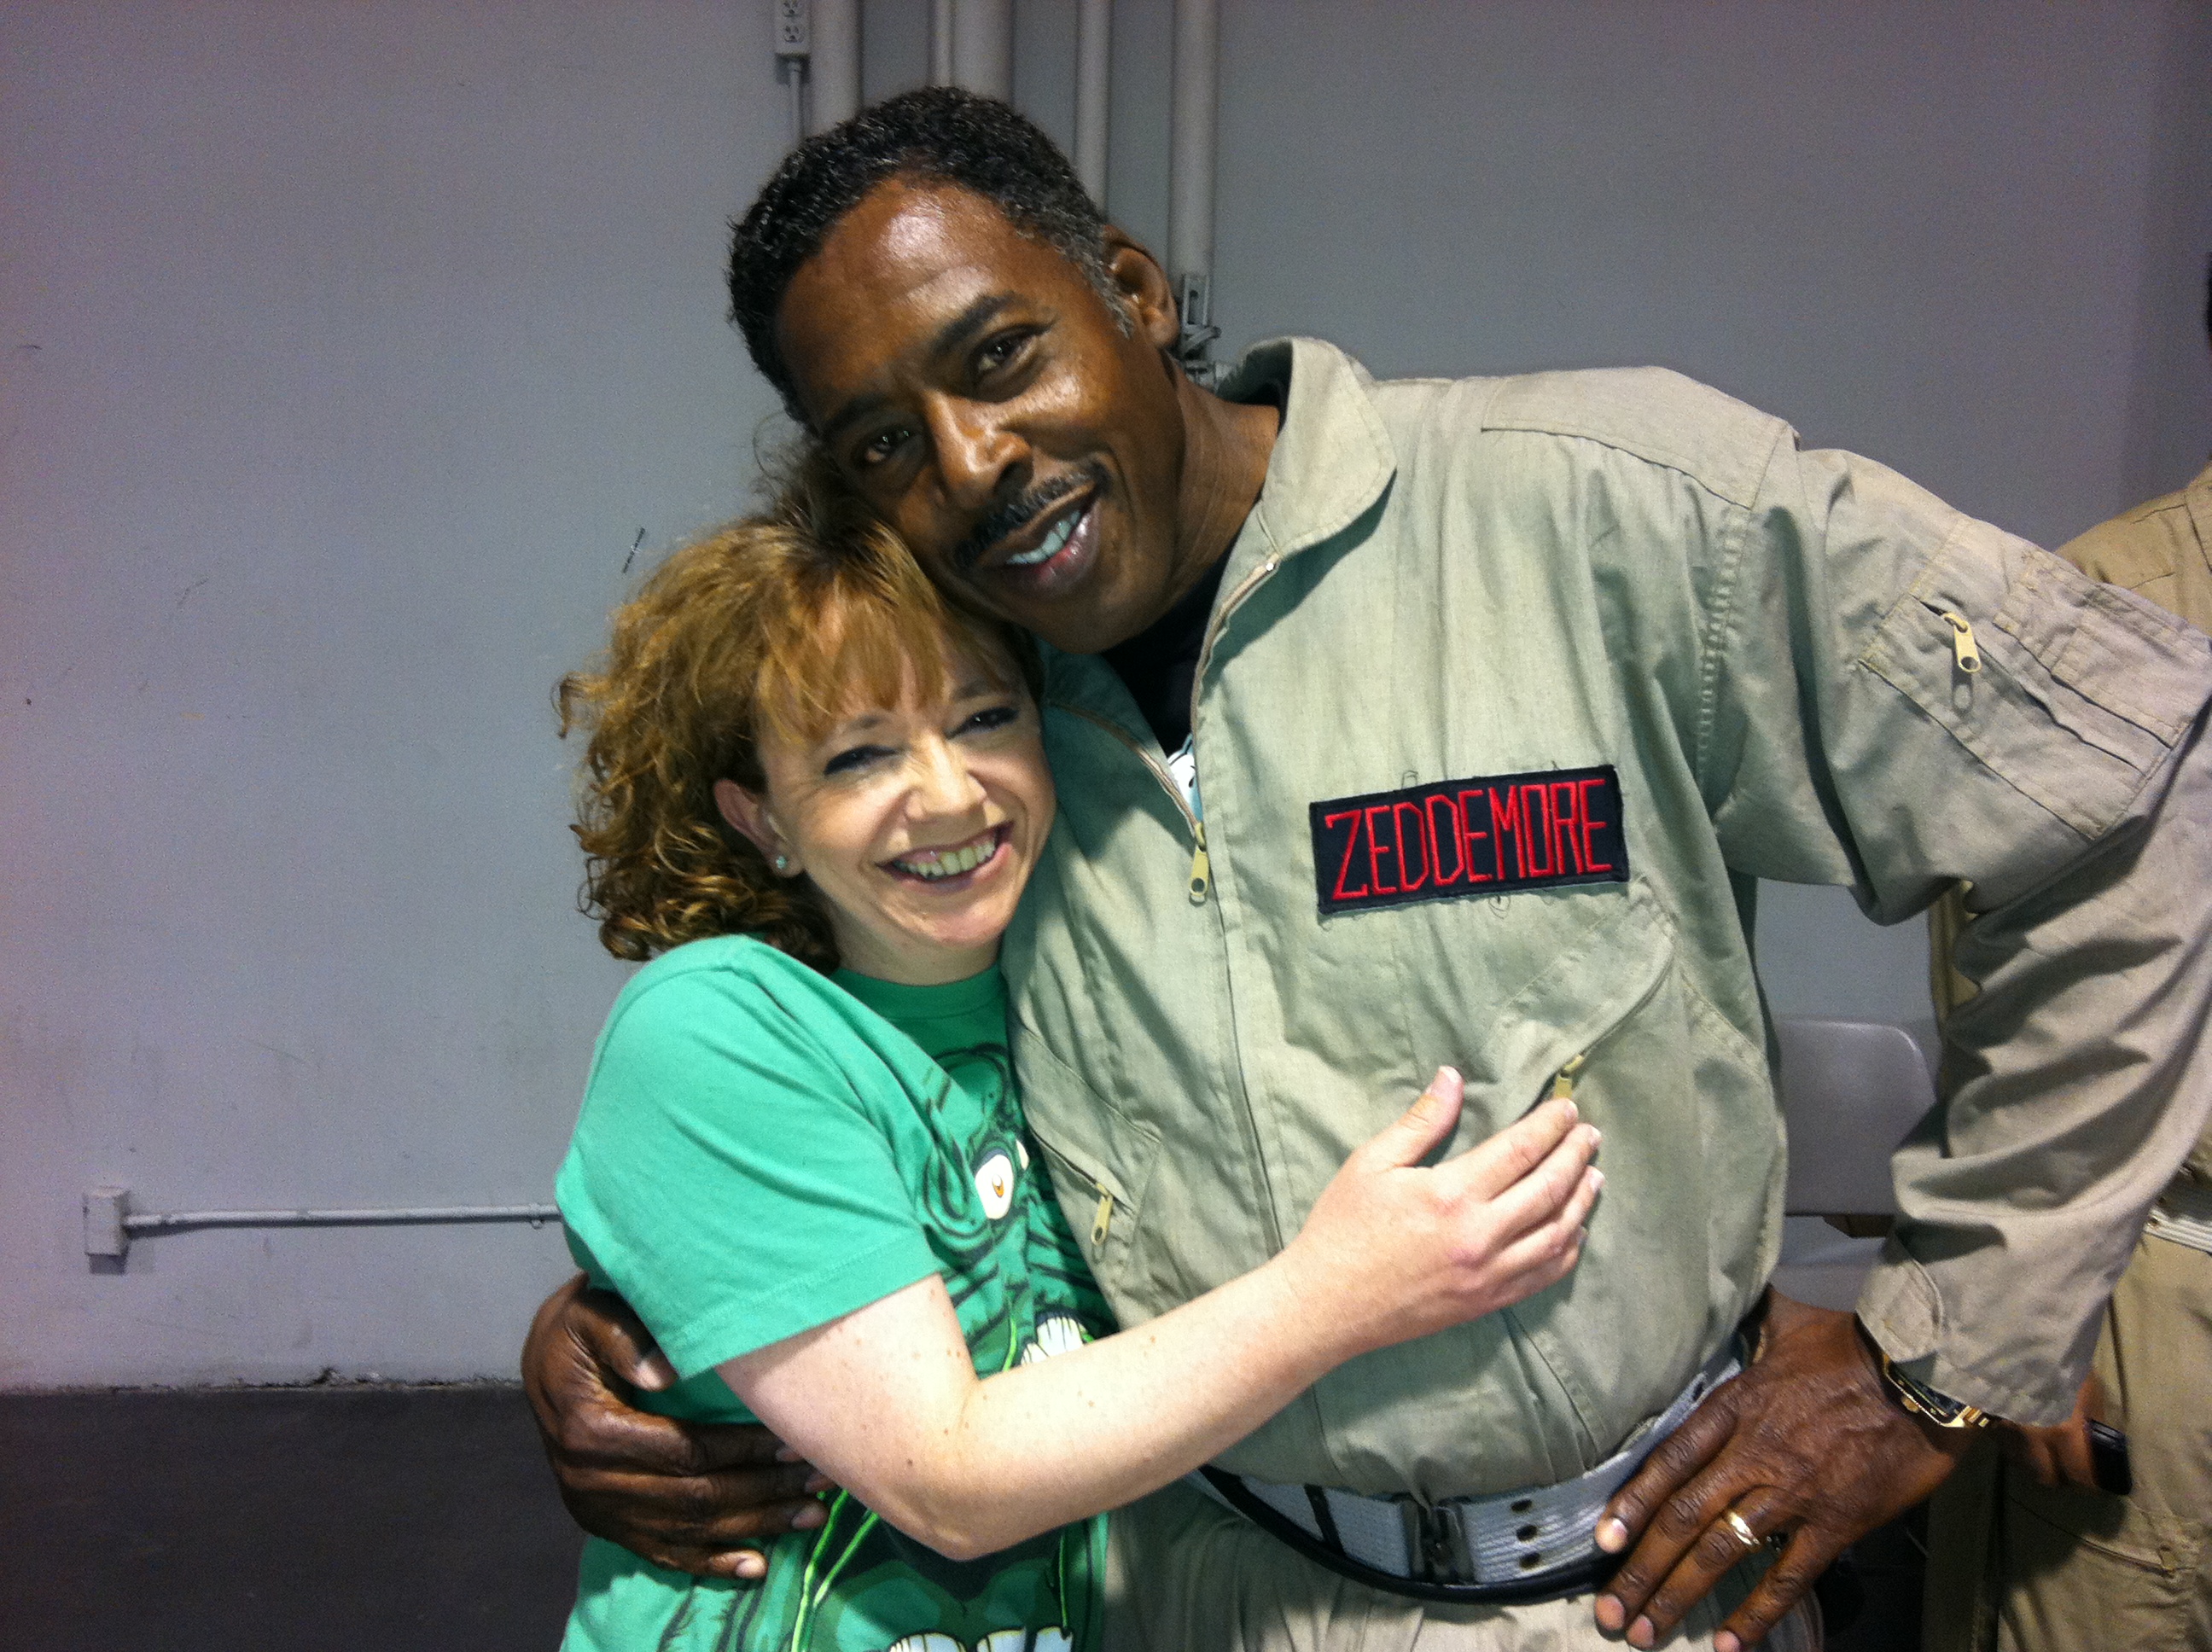 Robin Shelby with Ernie Hudson at the Anaheim Comic Con